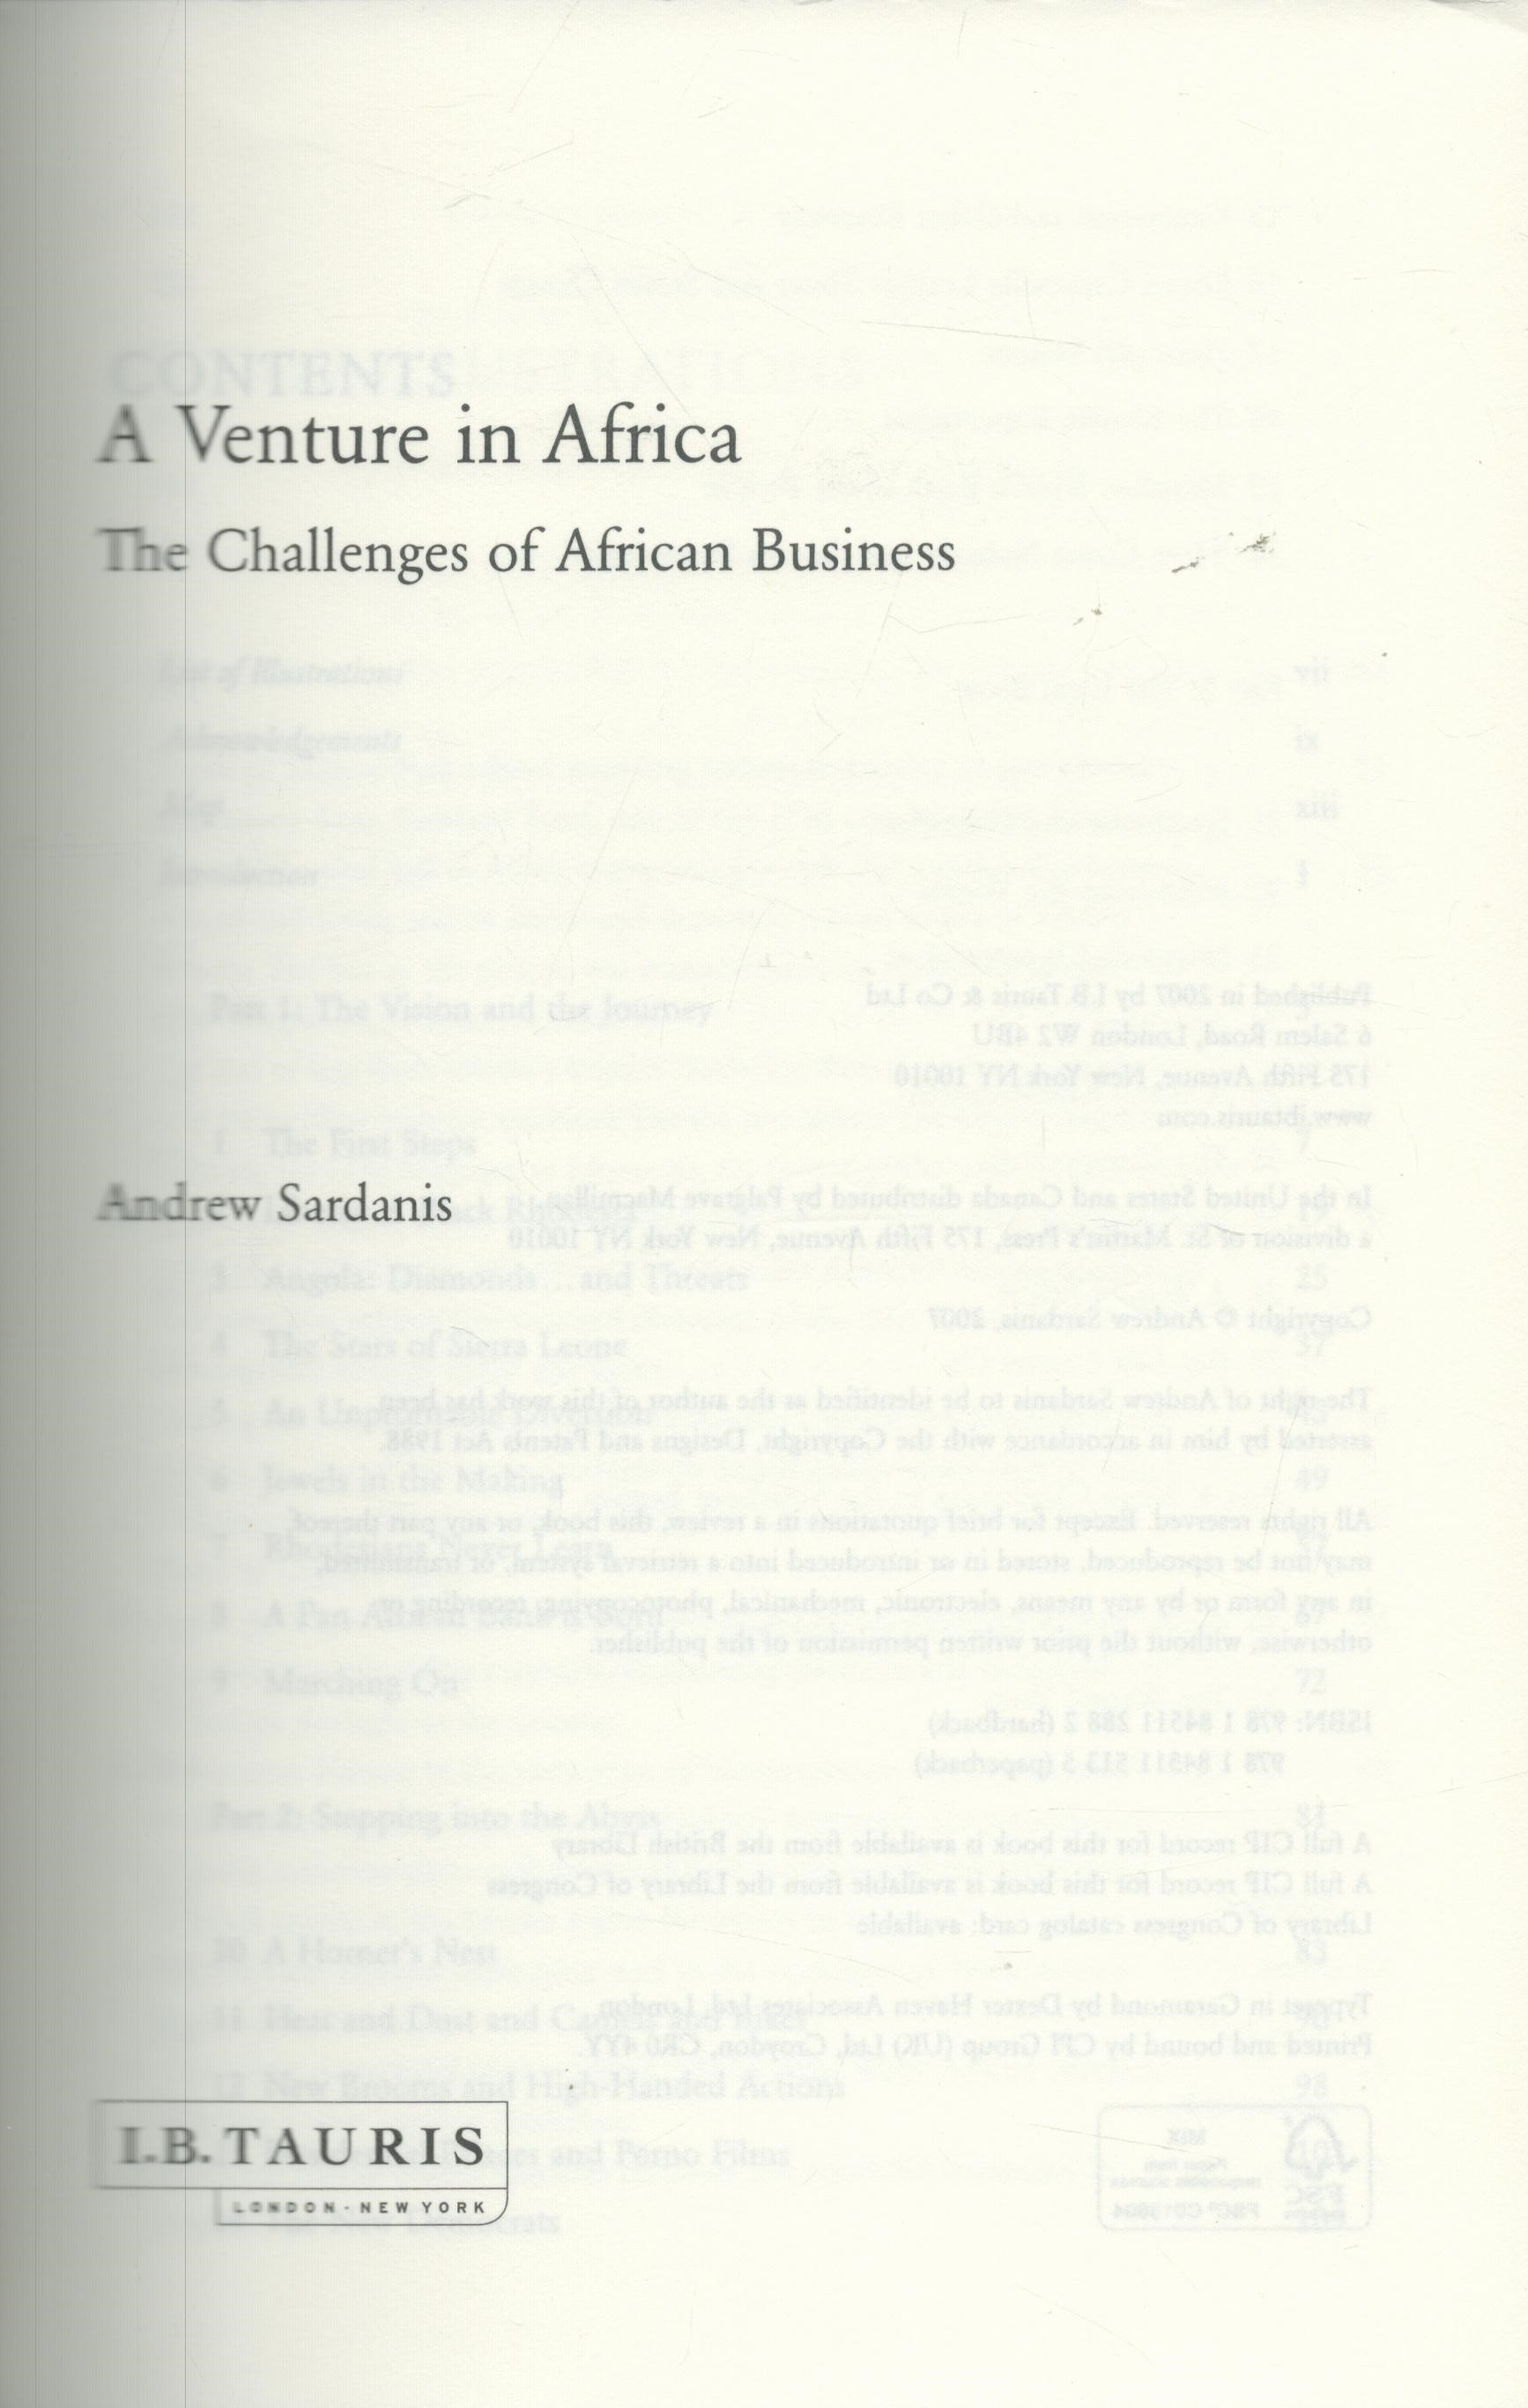 A Venture in Africa: The Challenges of African Business by Andrew Sardanis signed by author, First - Image 3 of 4